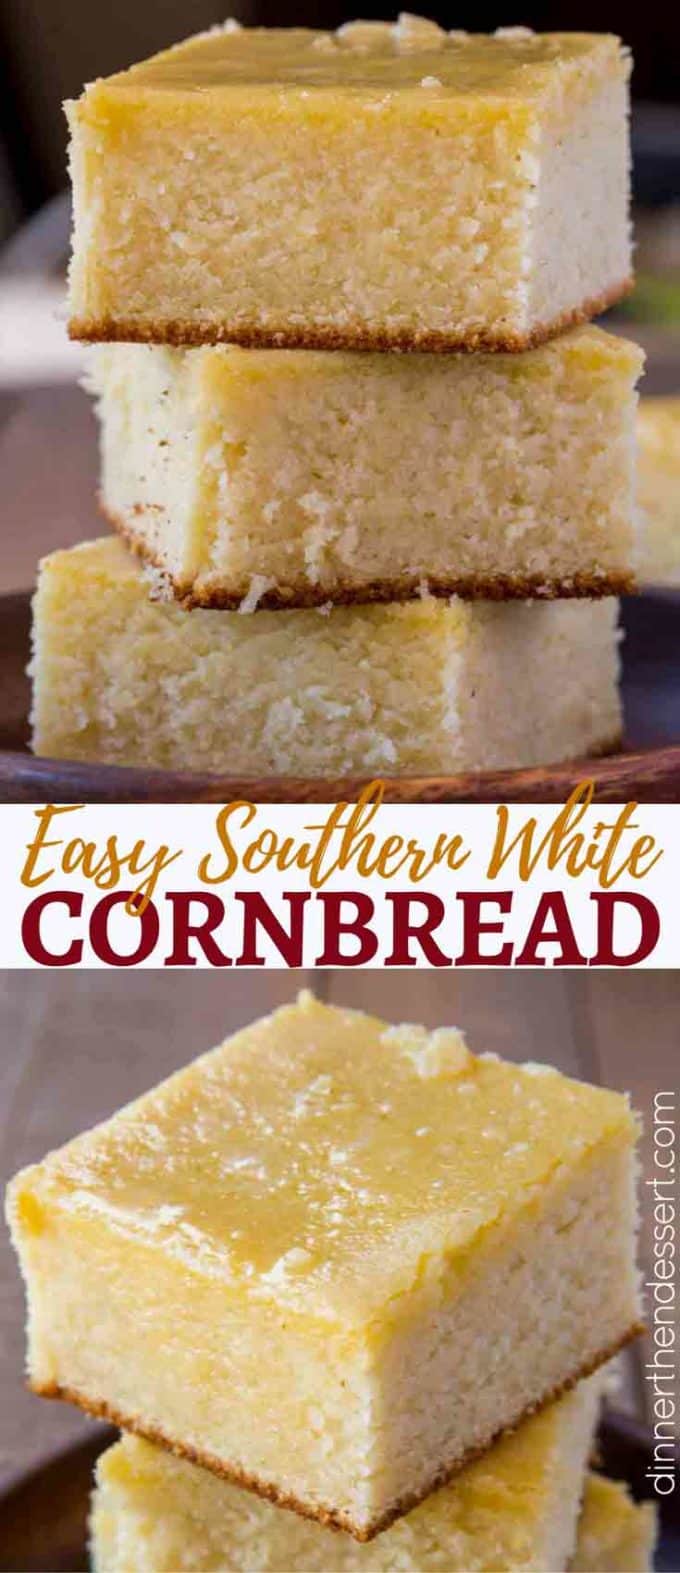 Quick and Easy to make, this Southern Cornbread is perfect and not too sweet!